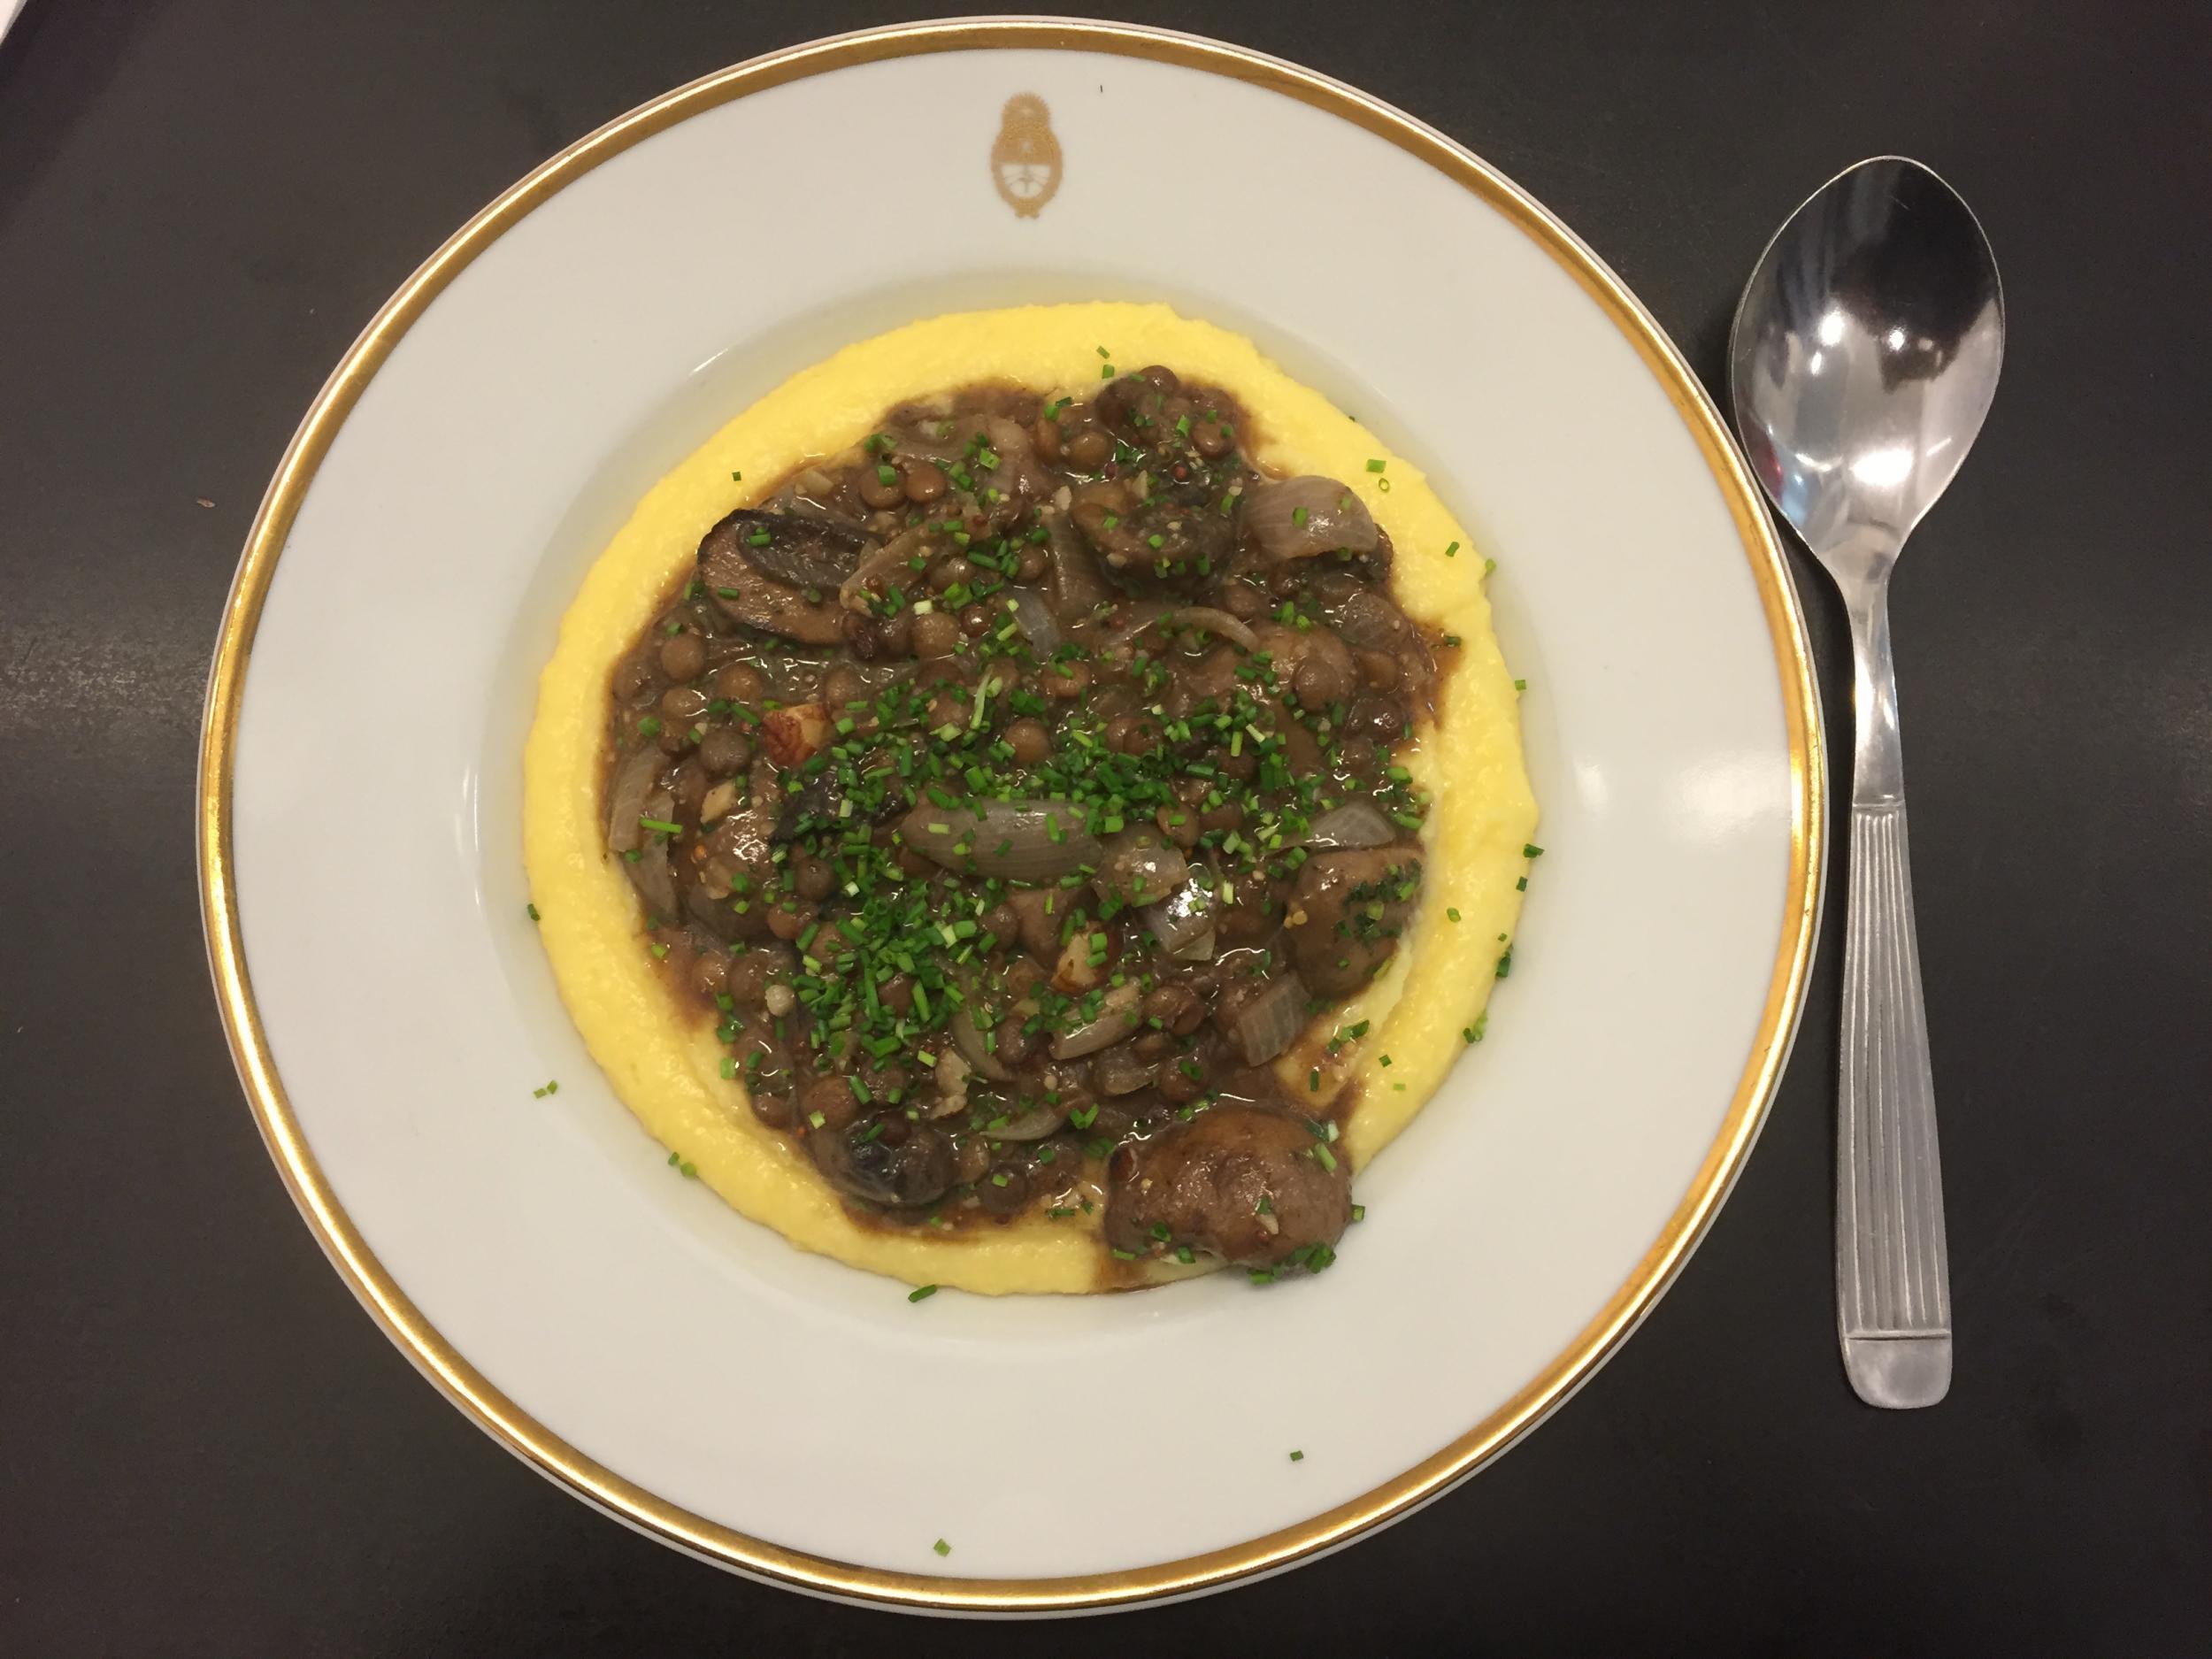 The staff’s favourite meal: polenta with mushroom, lentil and hazelnut ragout